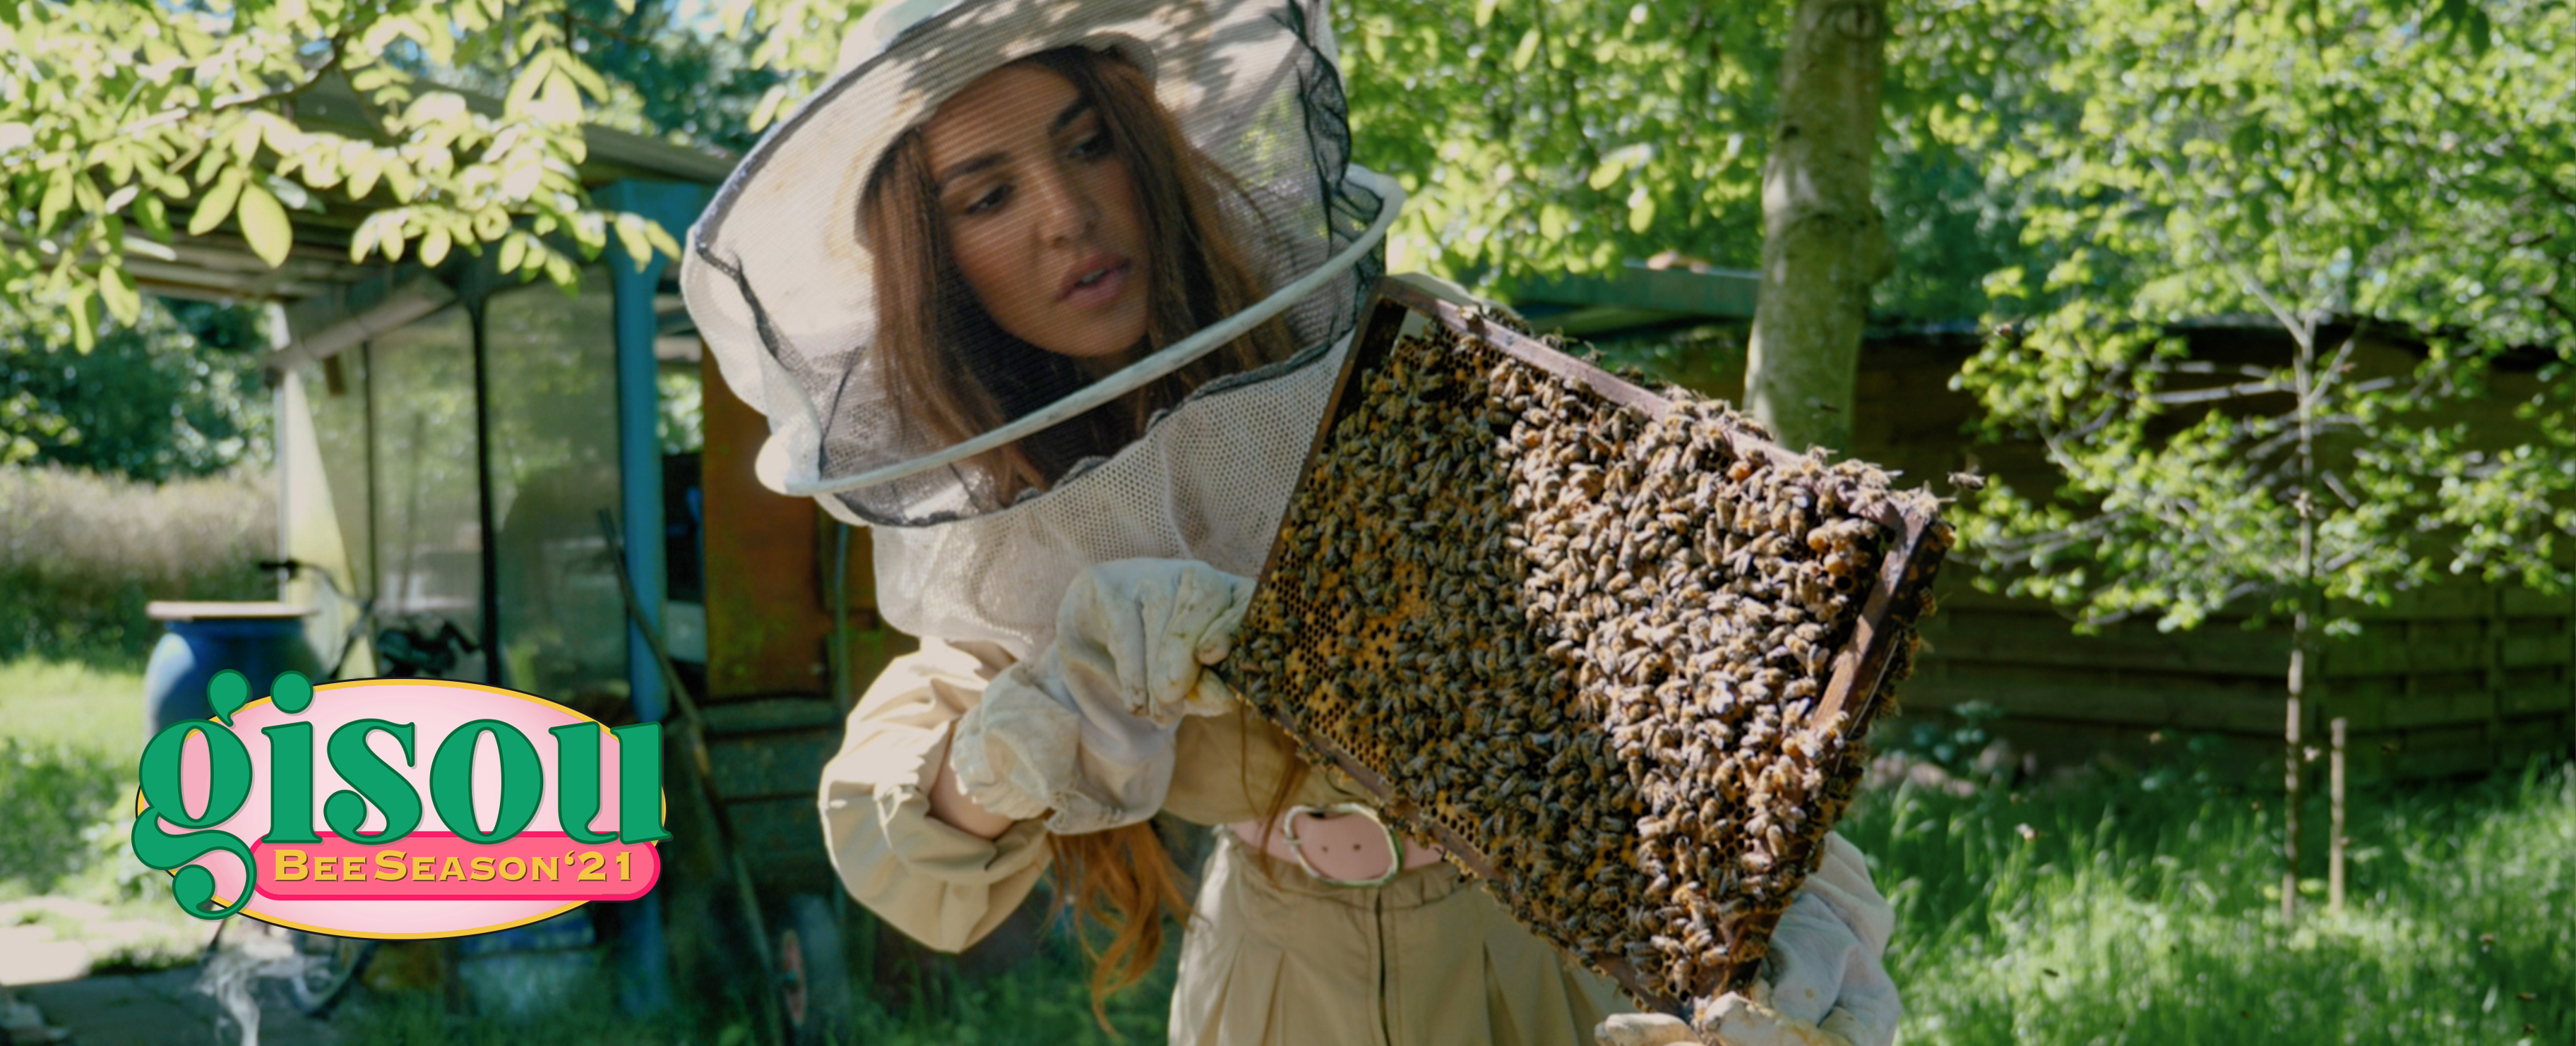 Negin in the bee garden holding a tray of bees